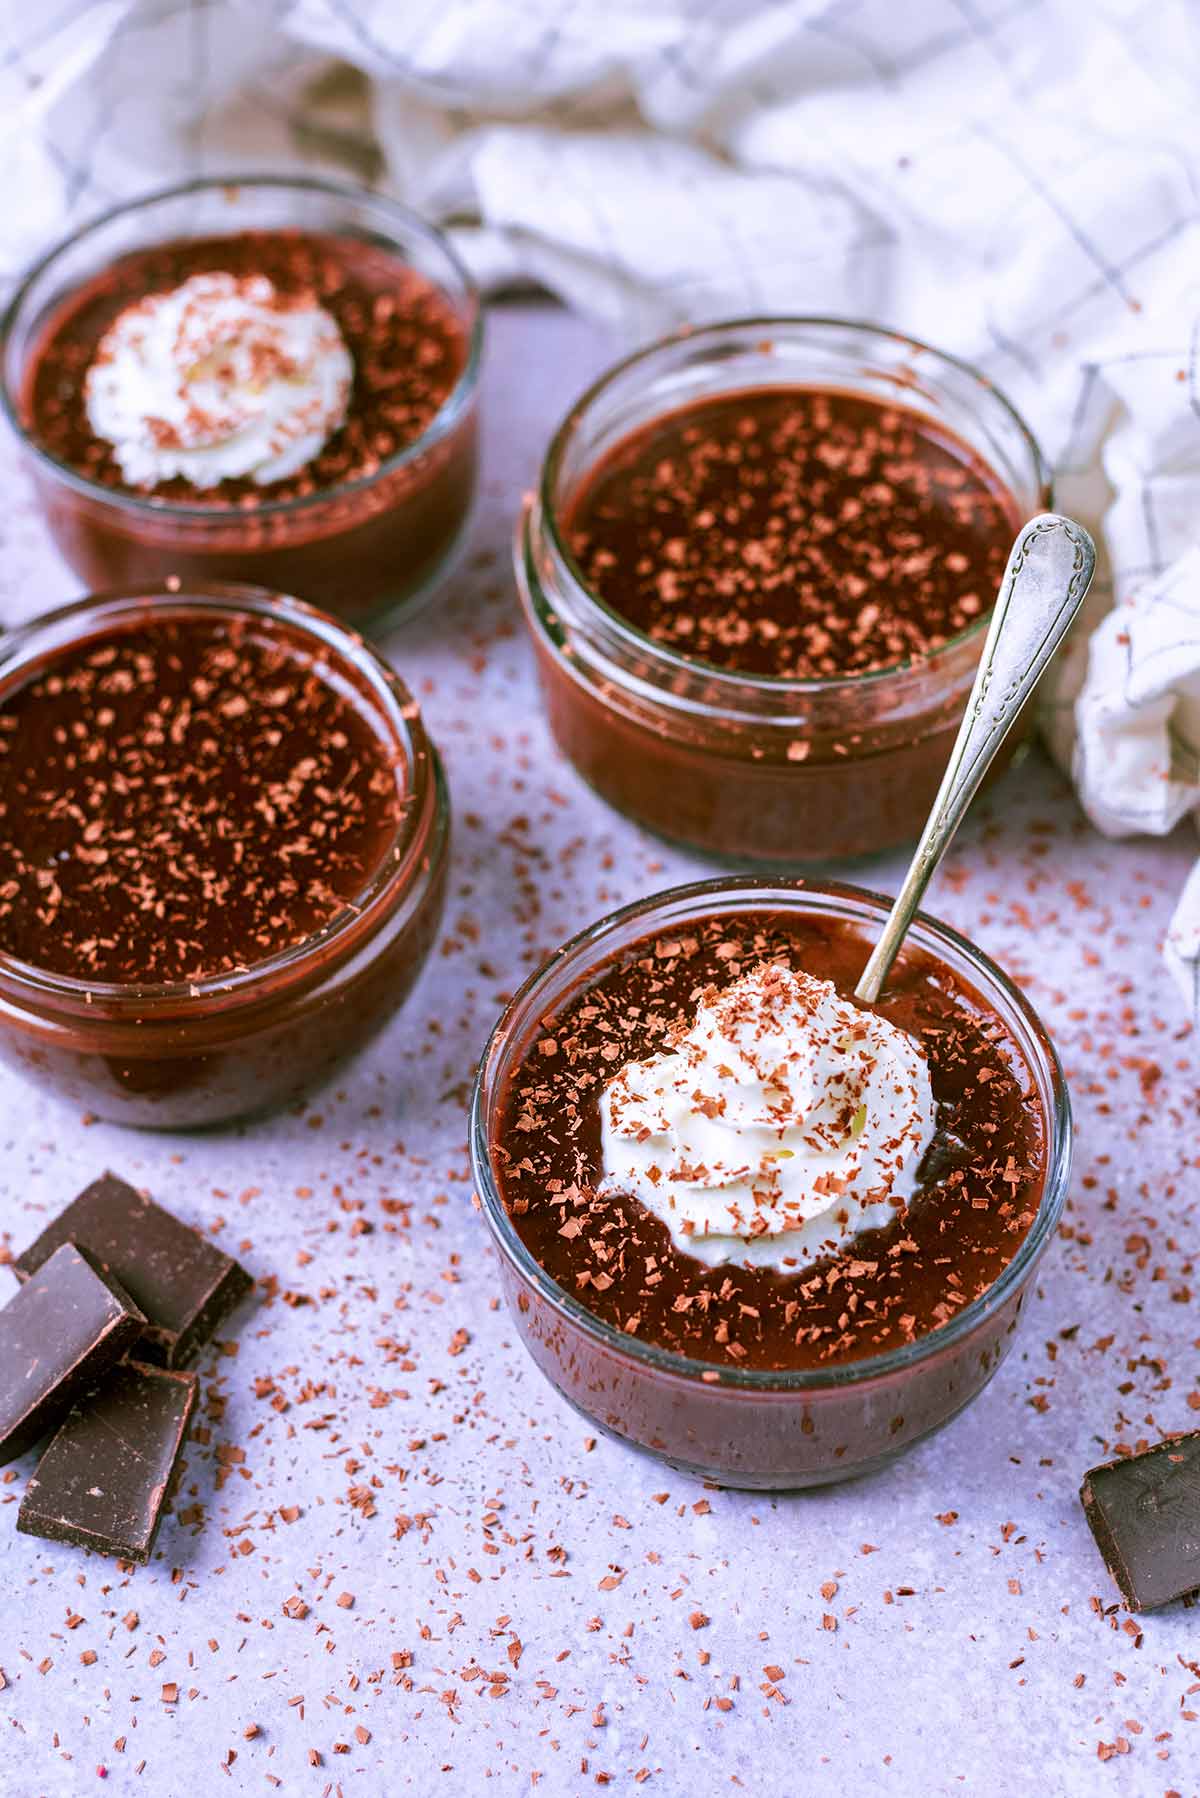 Four chocolate pots surrounded by chocolate shavings.